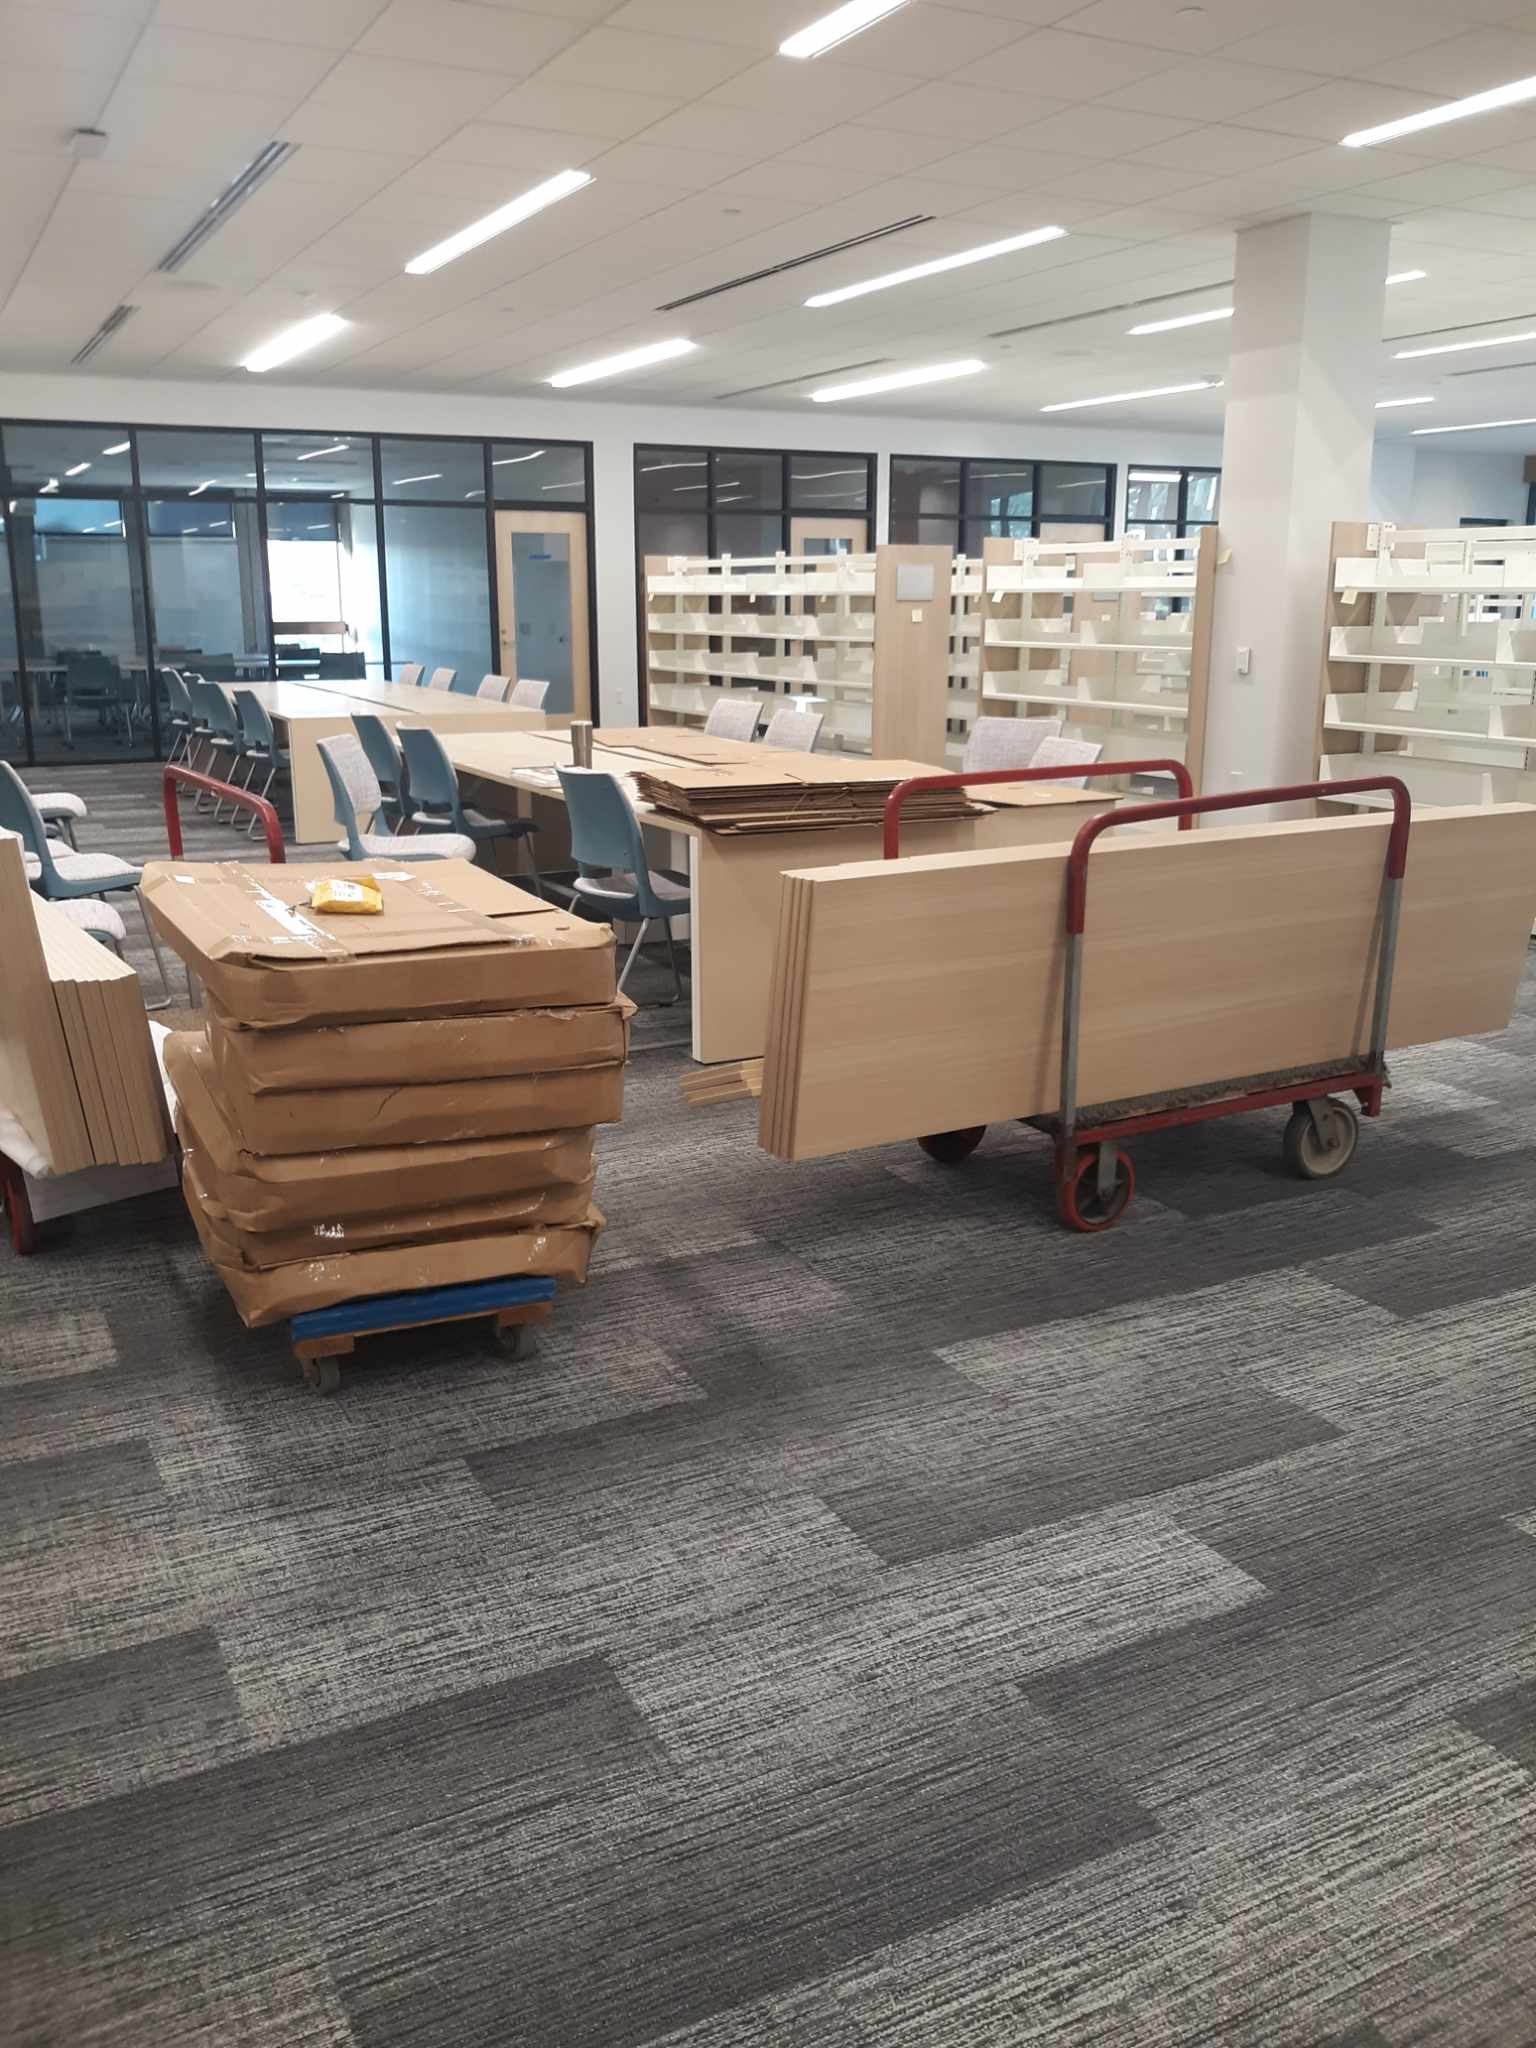 Shelves and the new computer stations being set up in the Adult Services area on the west side of the building.